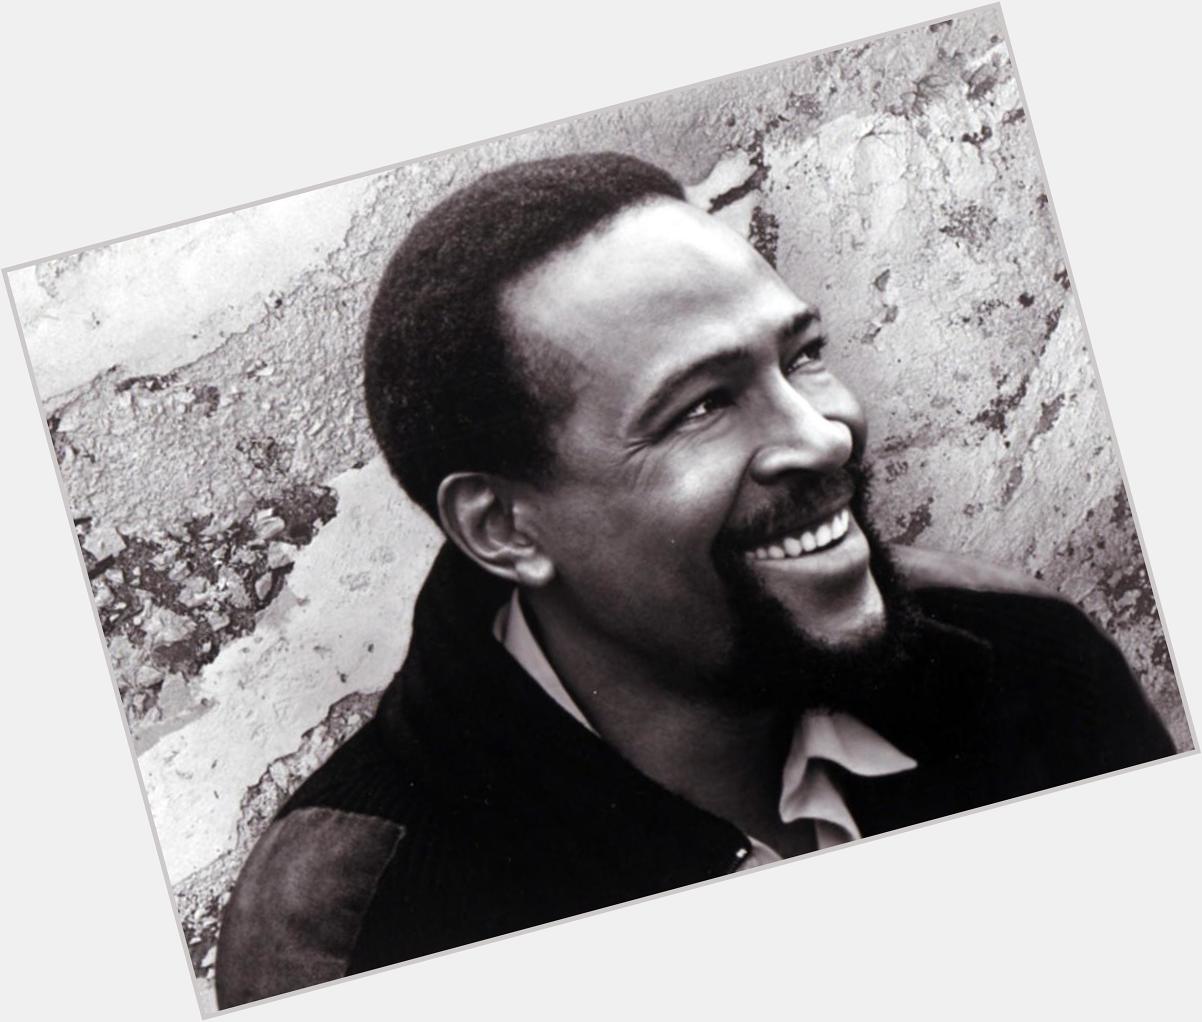 Happy Birthday Marvin Gaye - your songbook still brings soul & joy to my life 